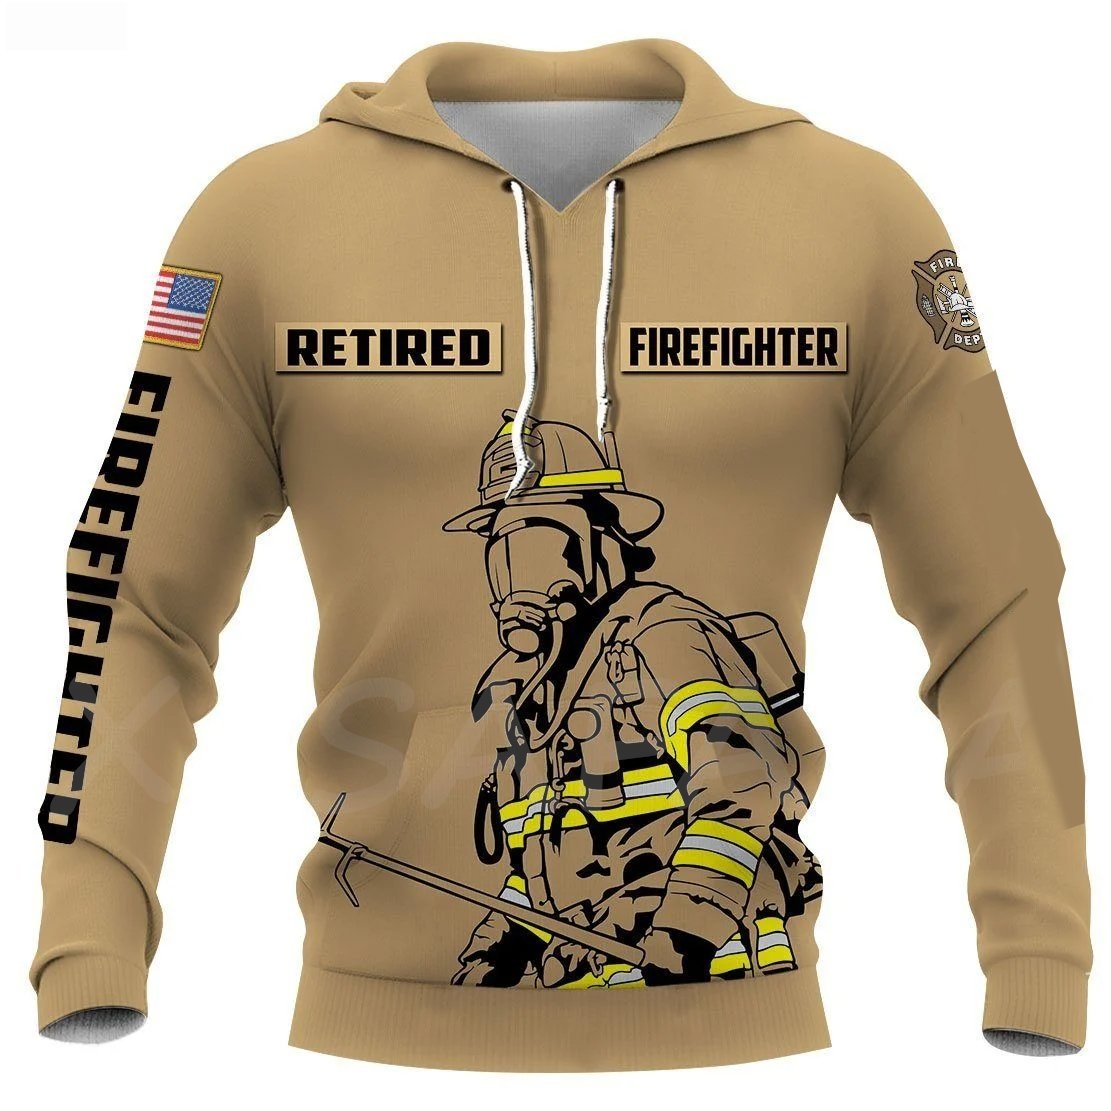 Retired Firefighter 3D Sublimated Hoodie - Salty Medic Clothing Co.